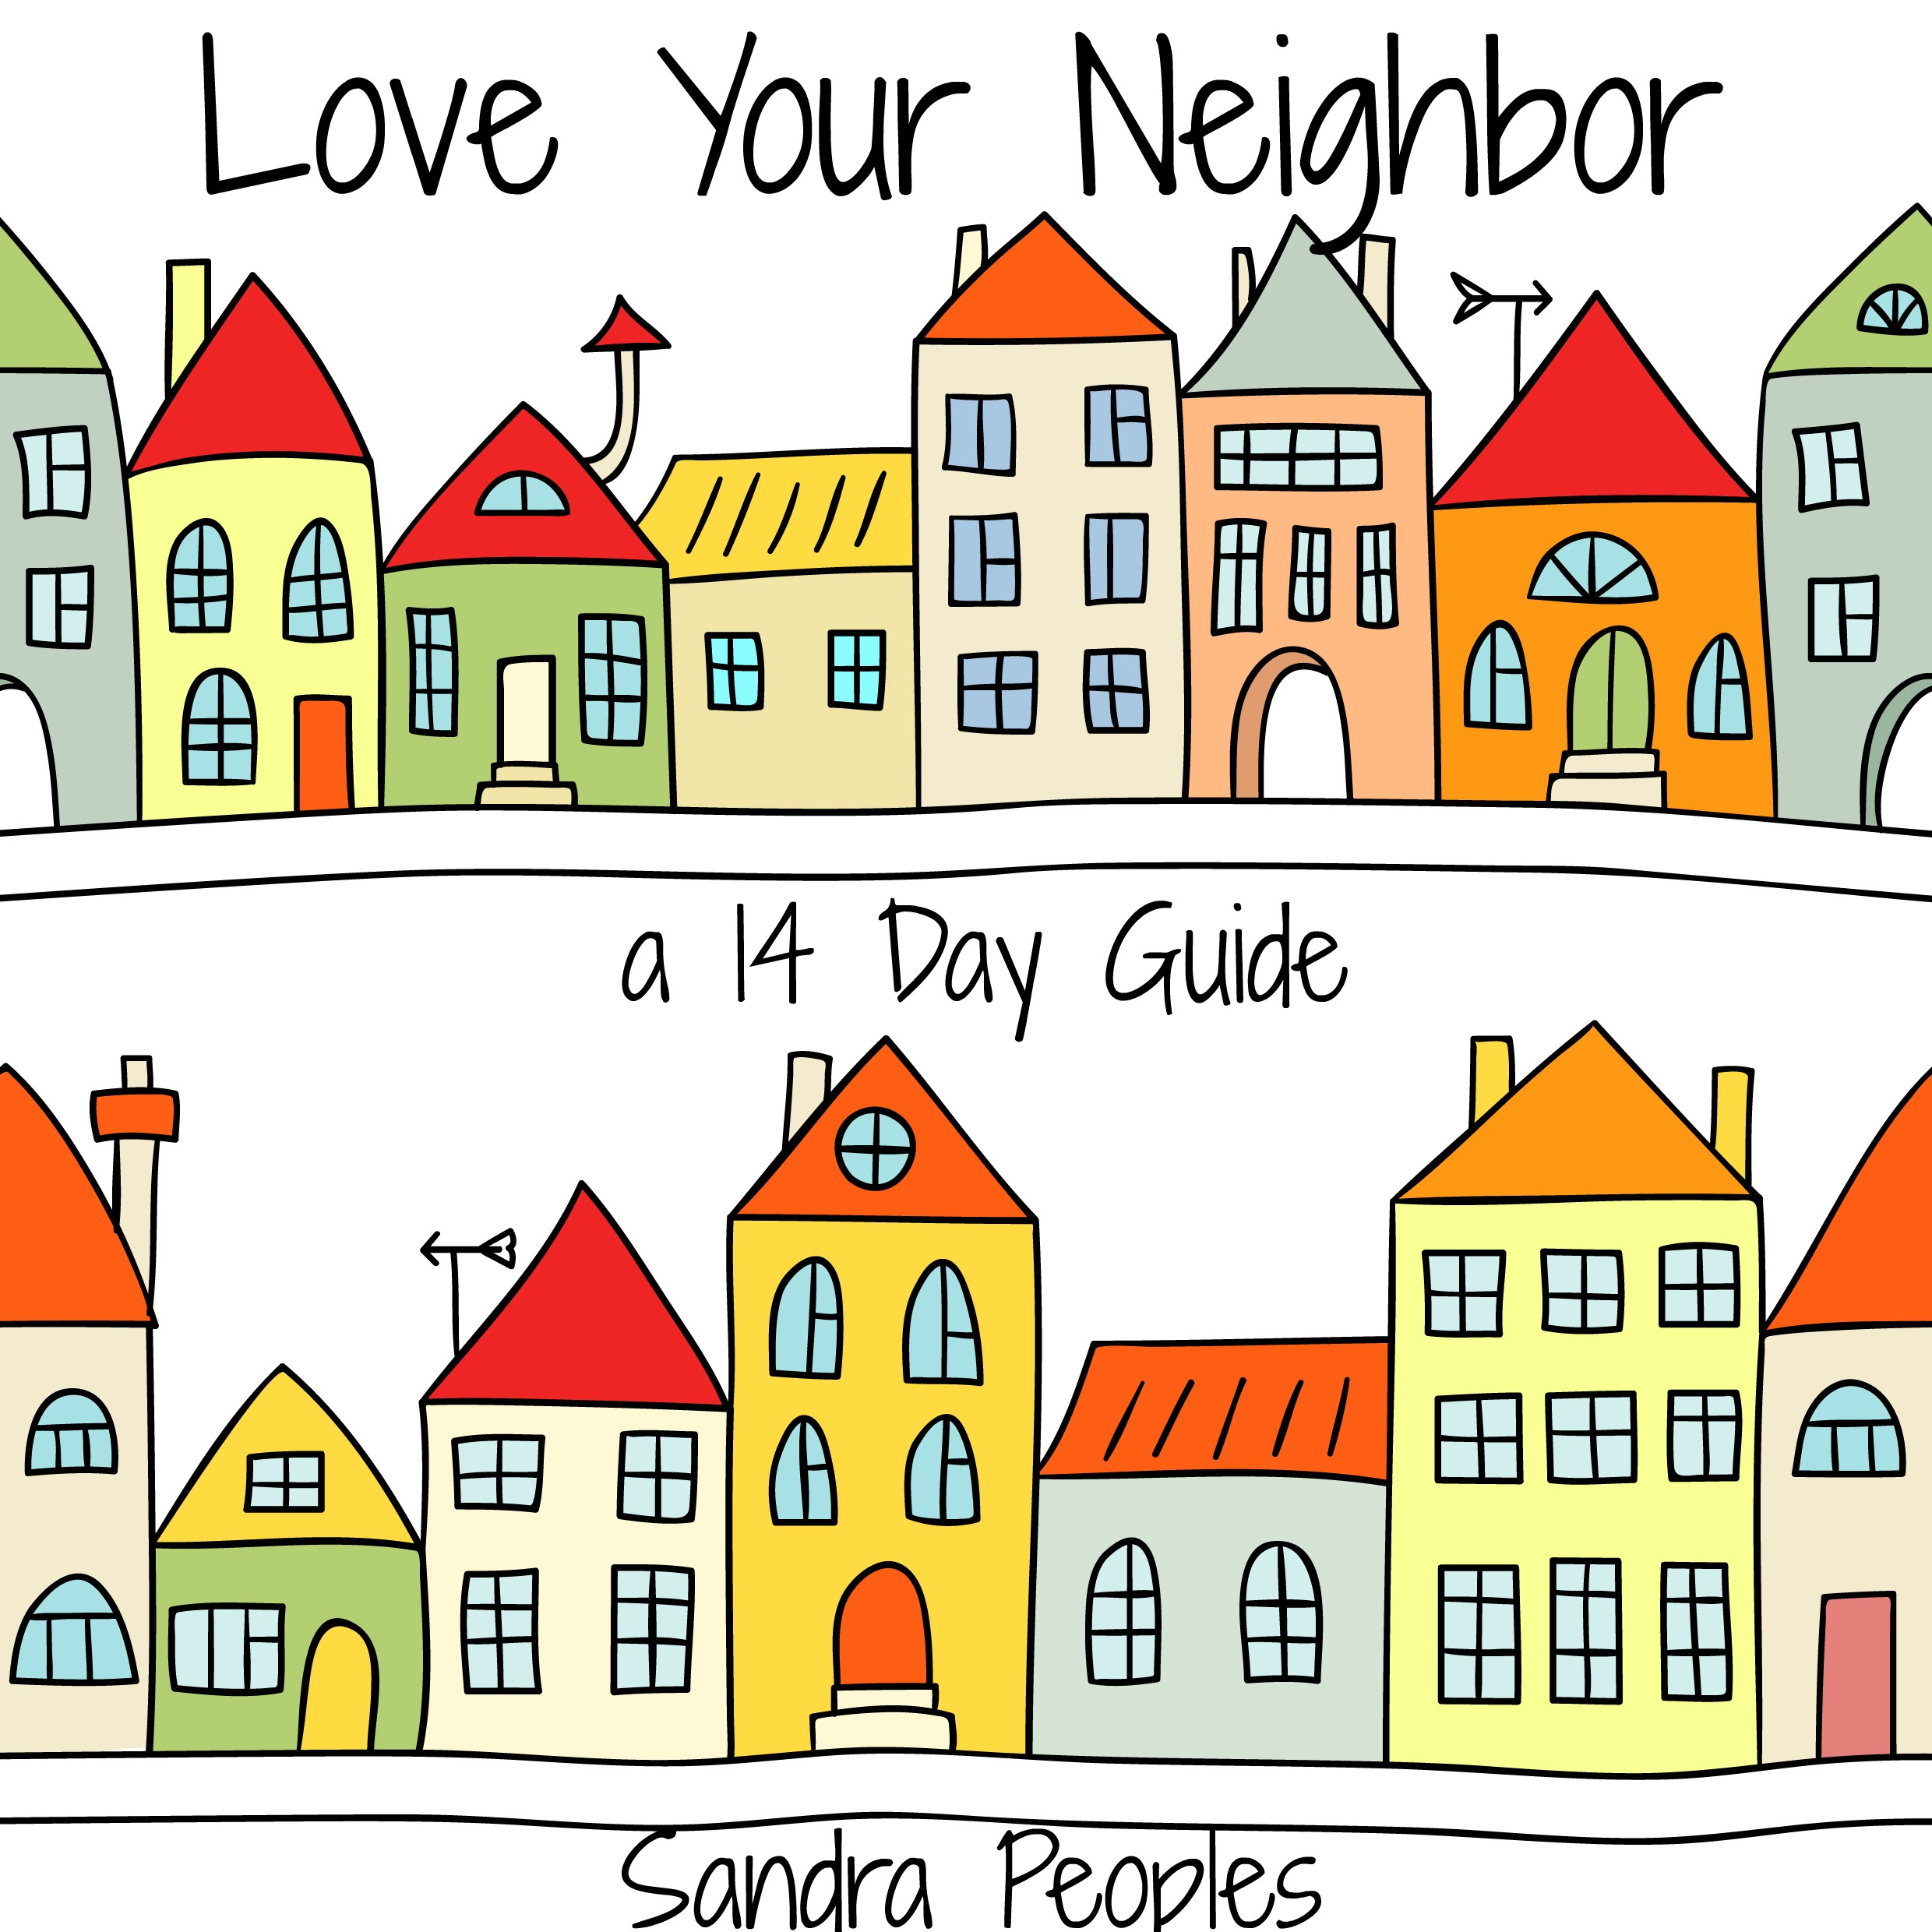 Love Your Neighbor, PDF e-book by Sandra Peoples